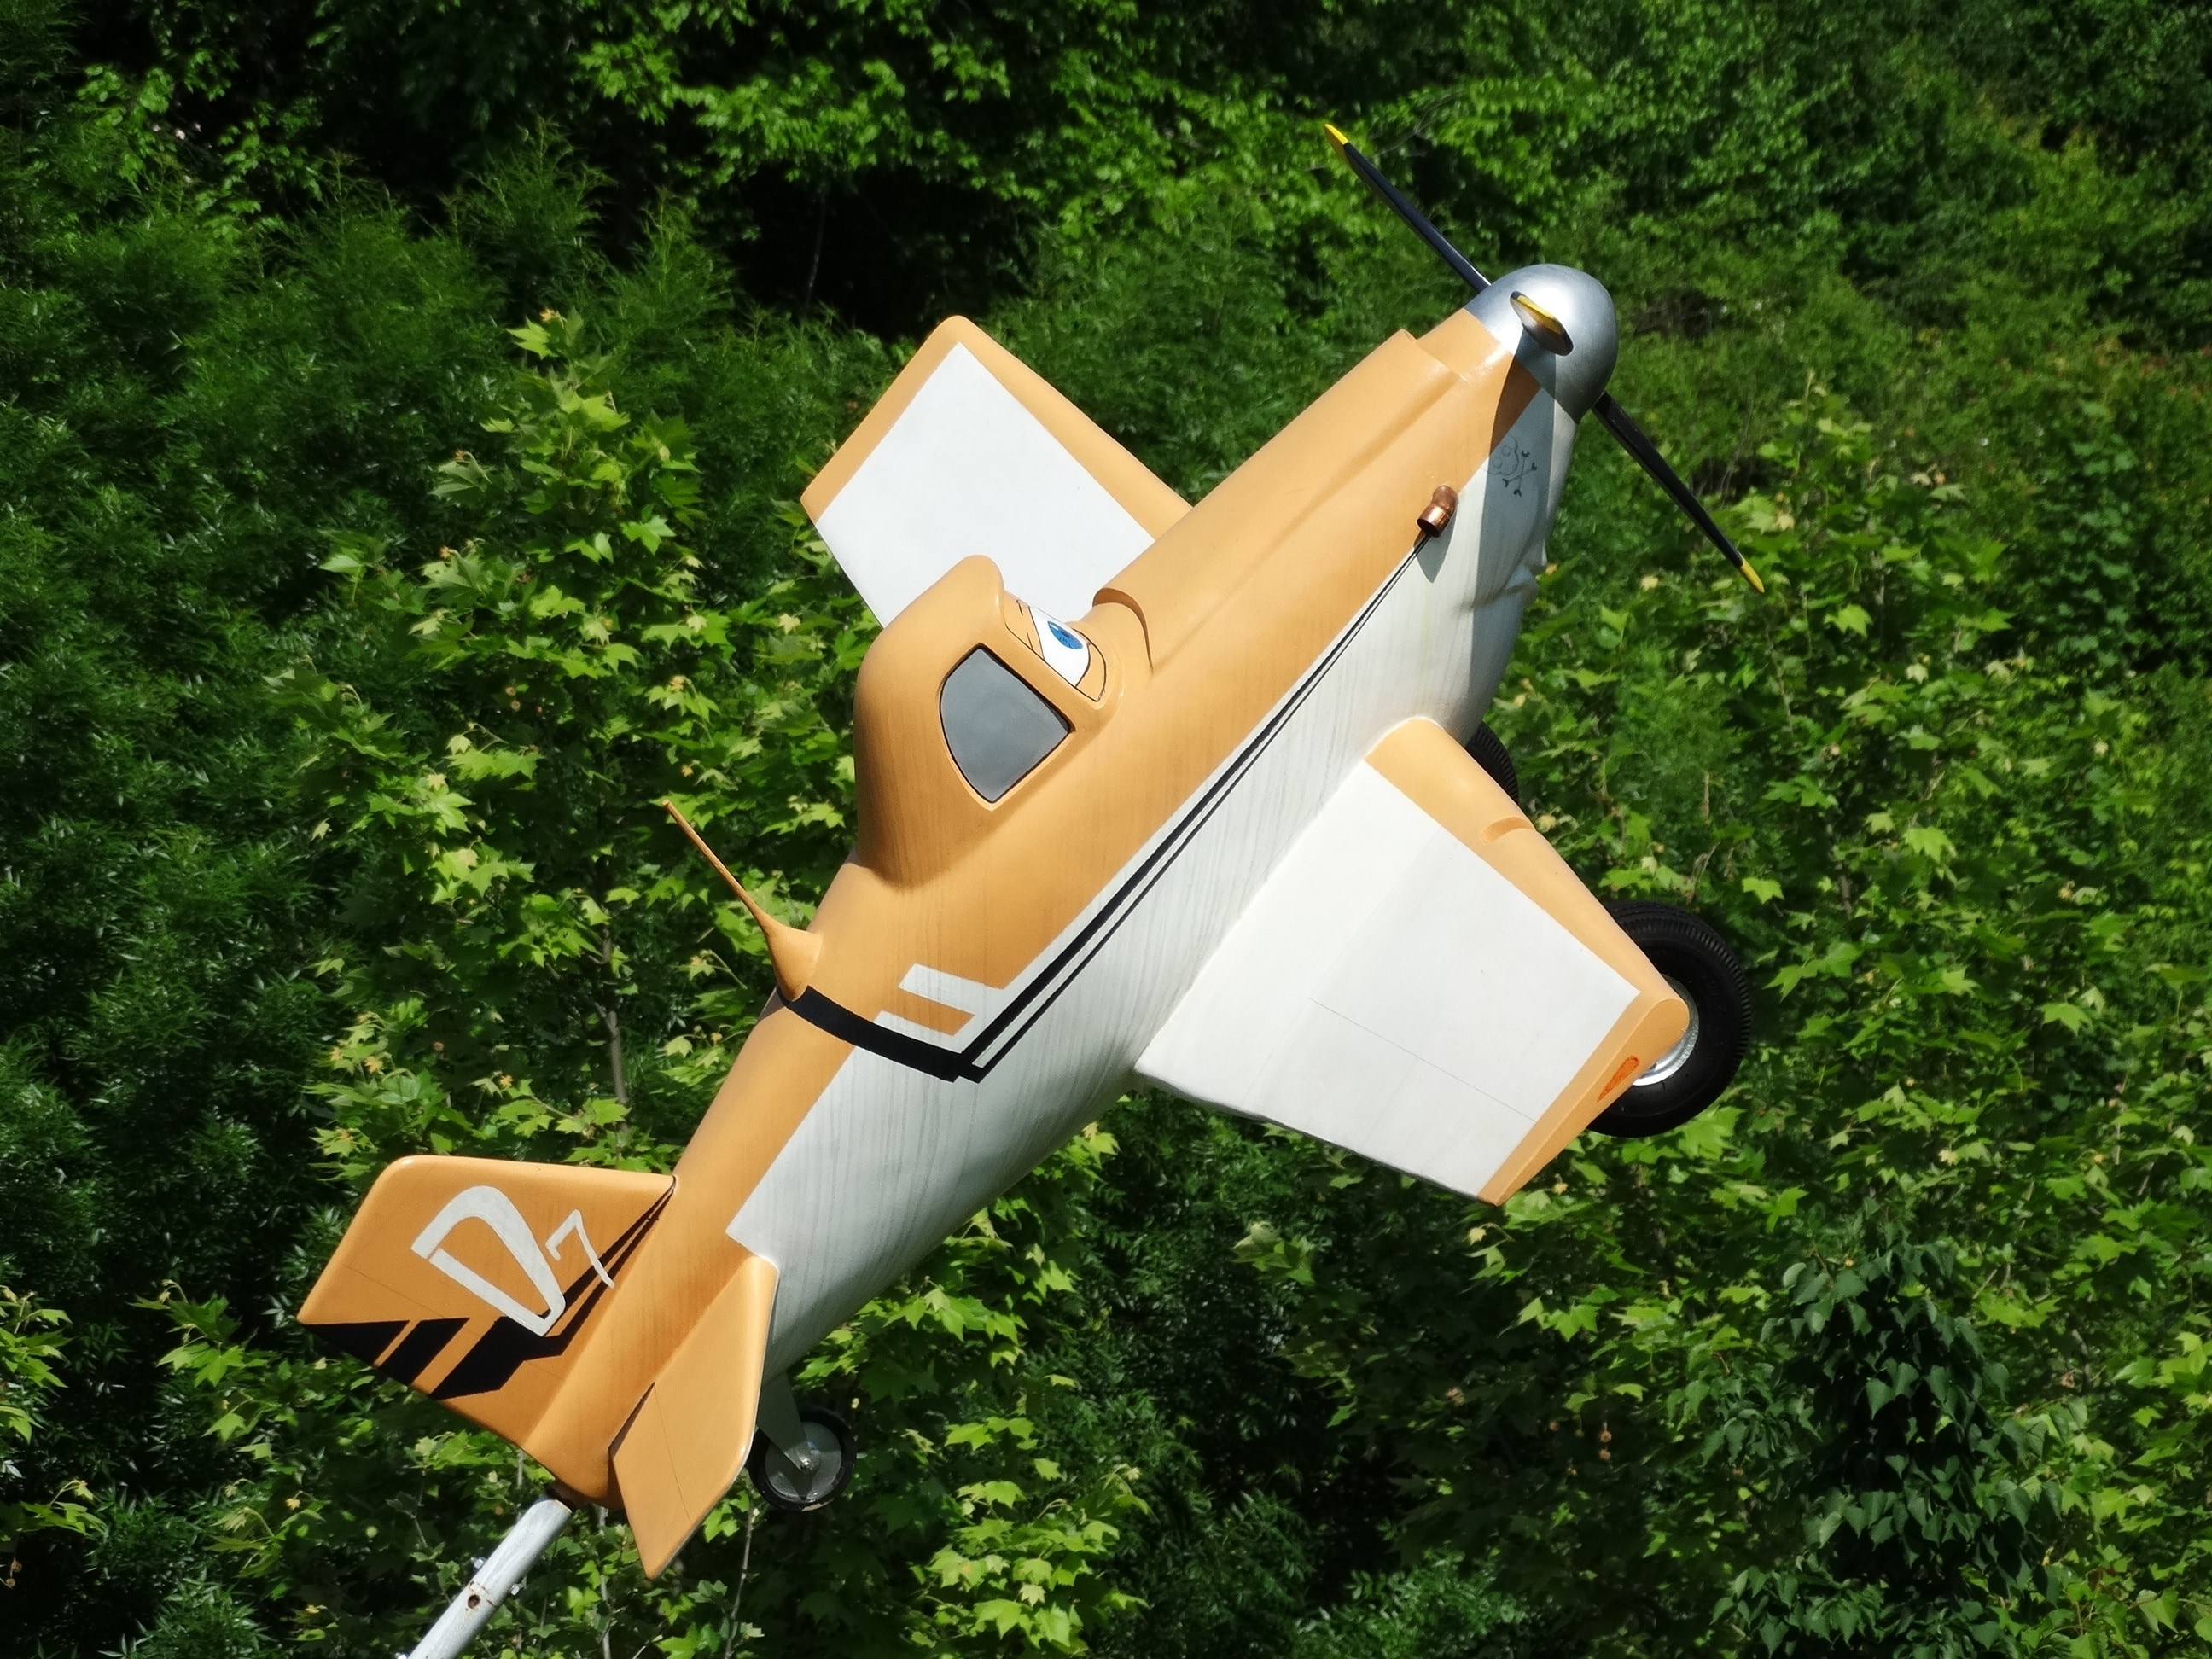 white and brown rc biplane toy